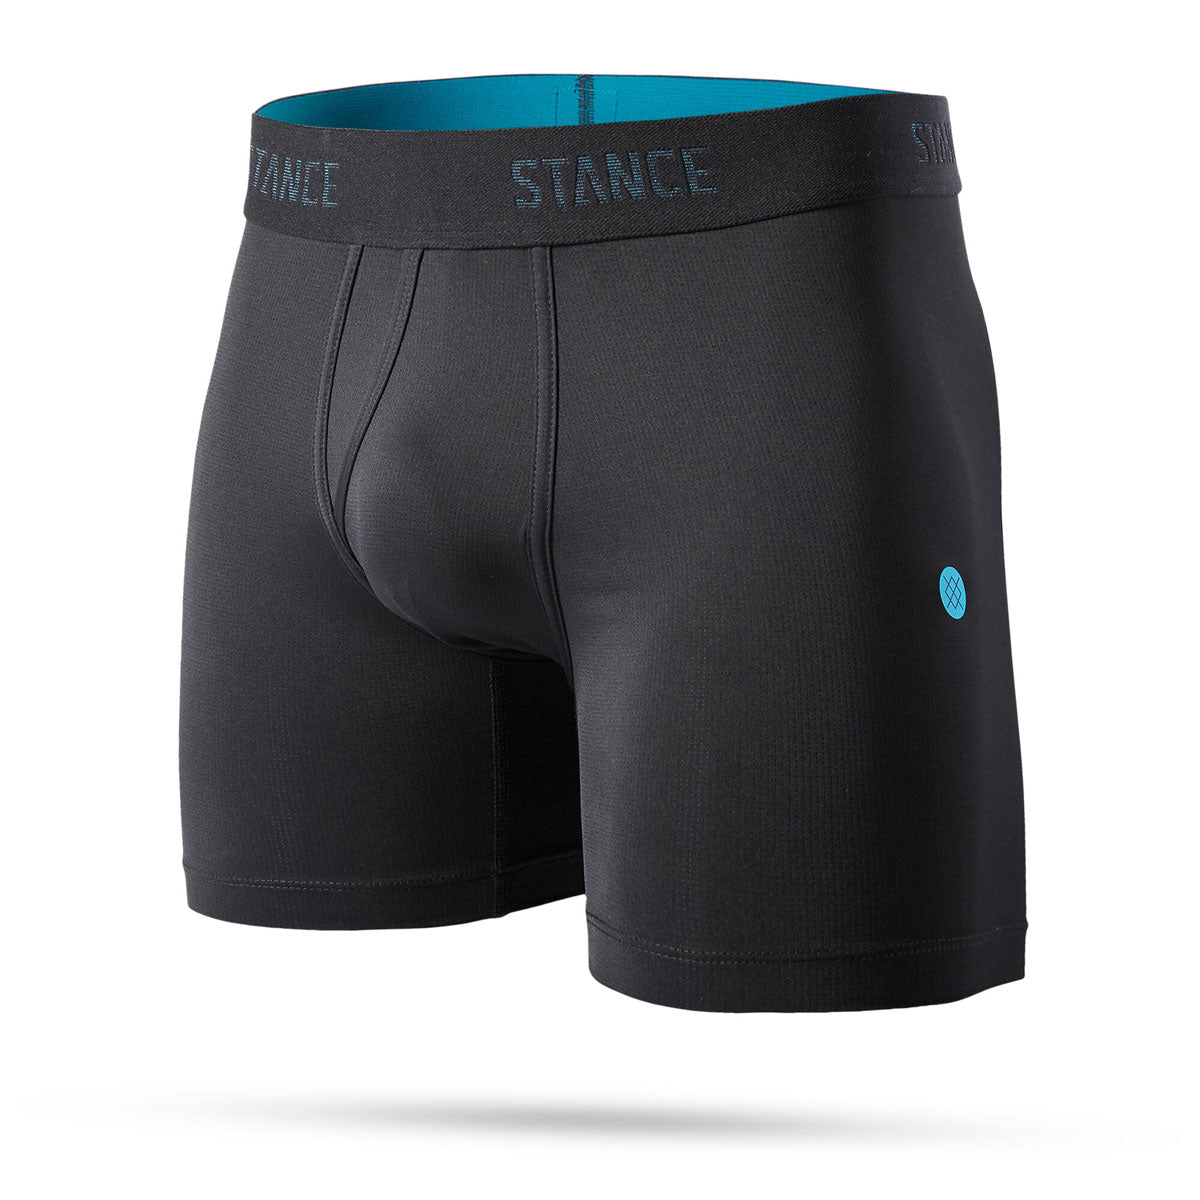 Stance Pure St 6in Boxer Brief - Black image 1